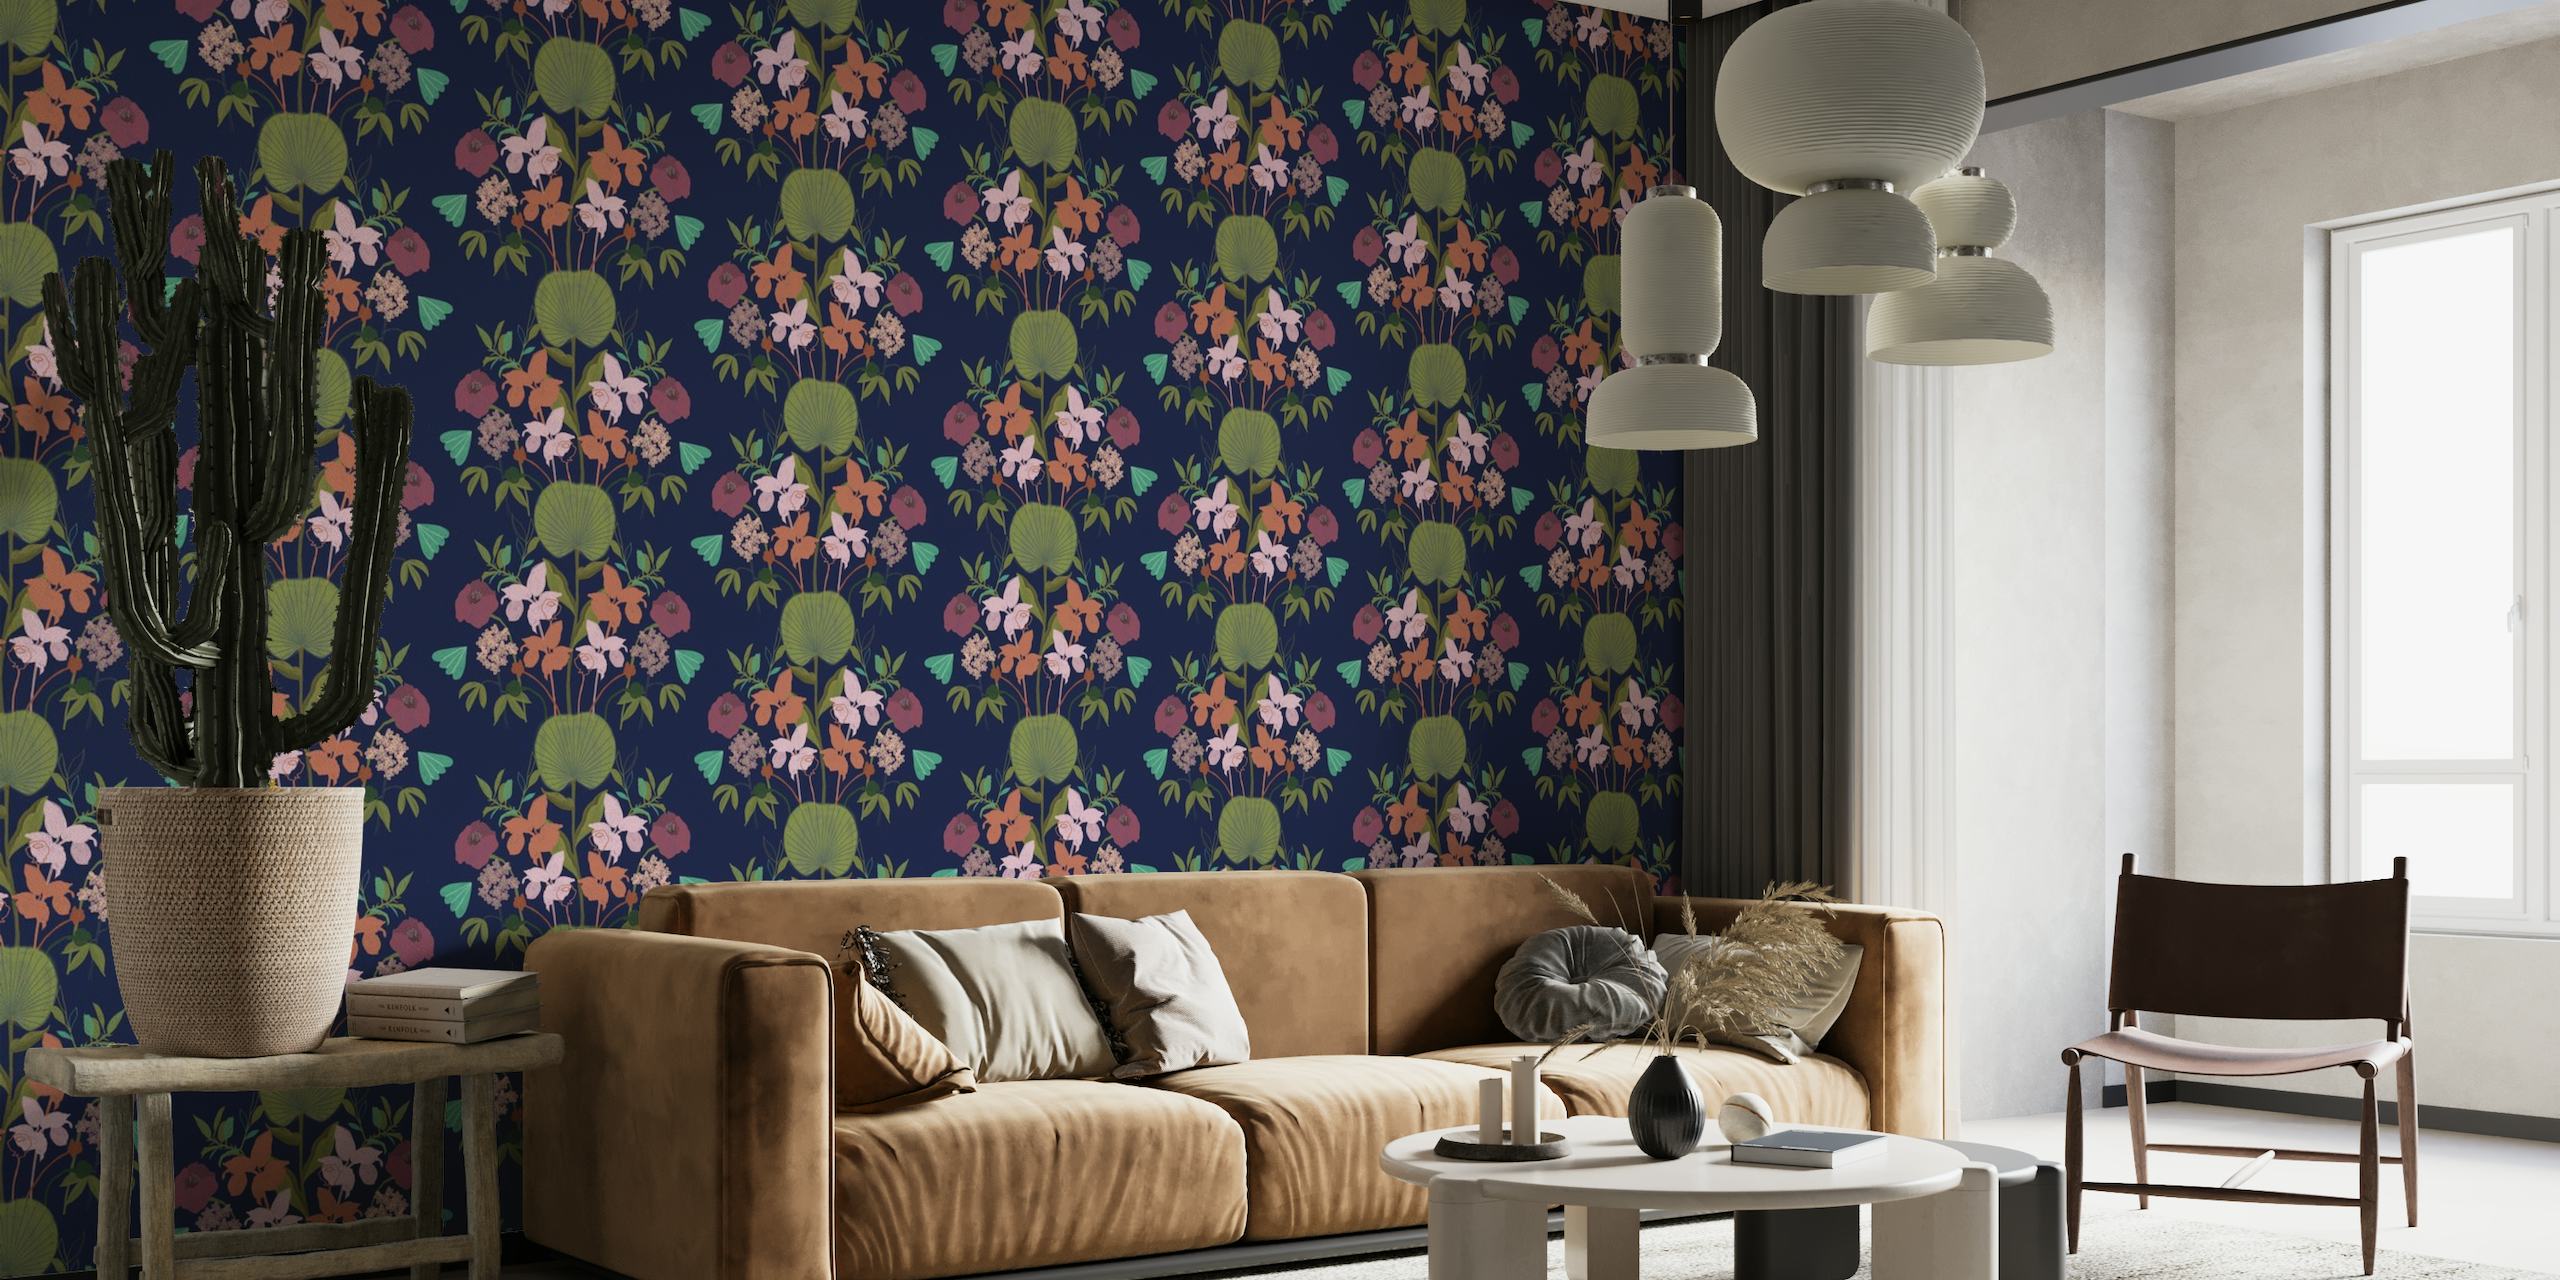 Lotus Leaf - Dark Blue wall mural featuring stylized botanical elements on a deep blue background